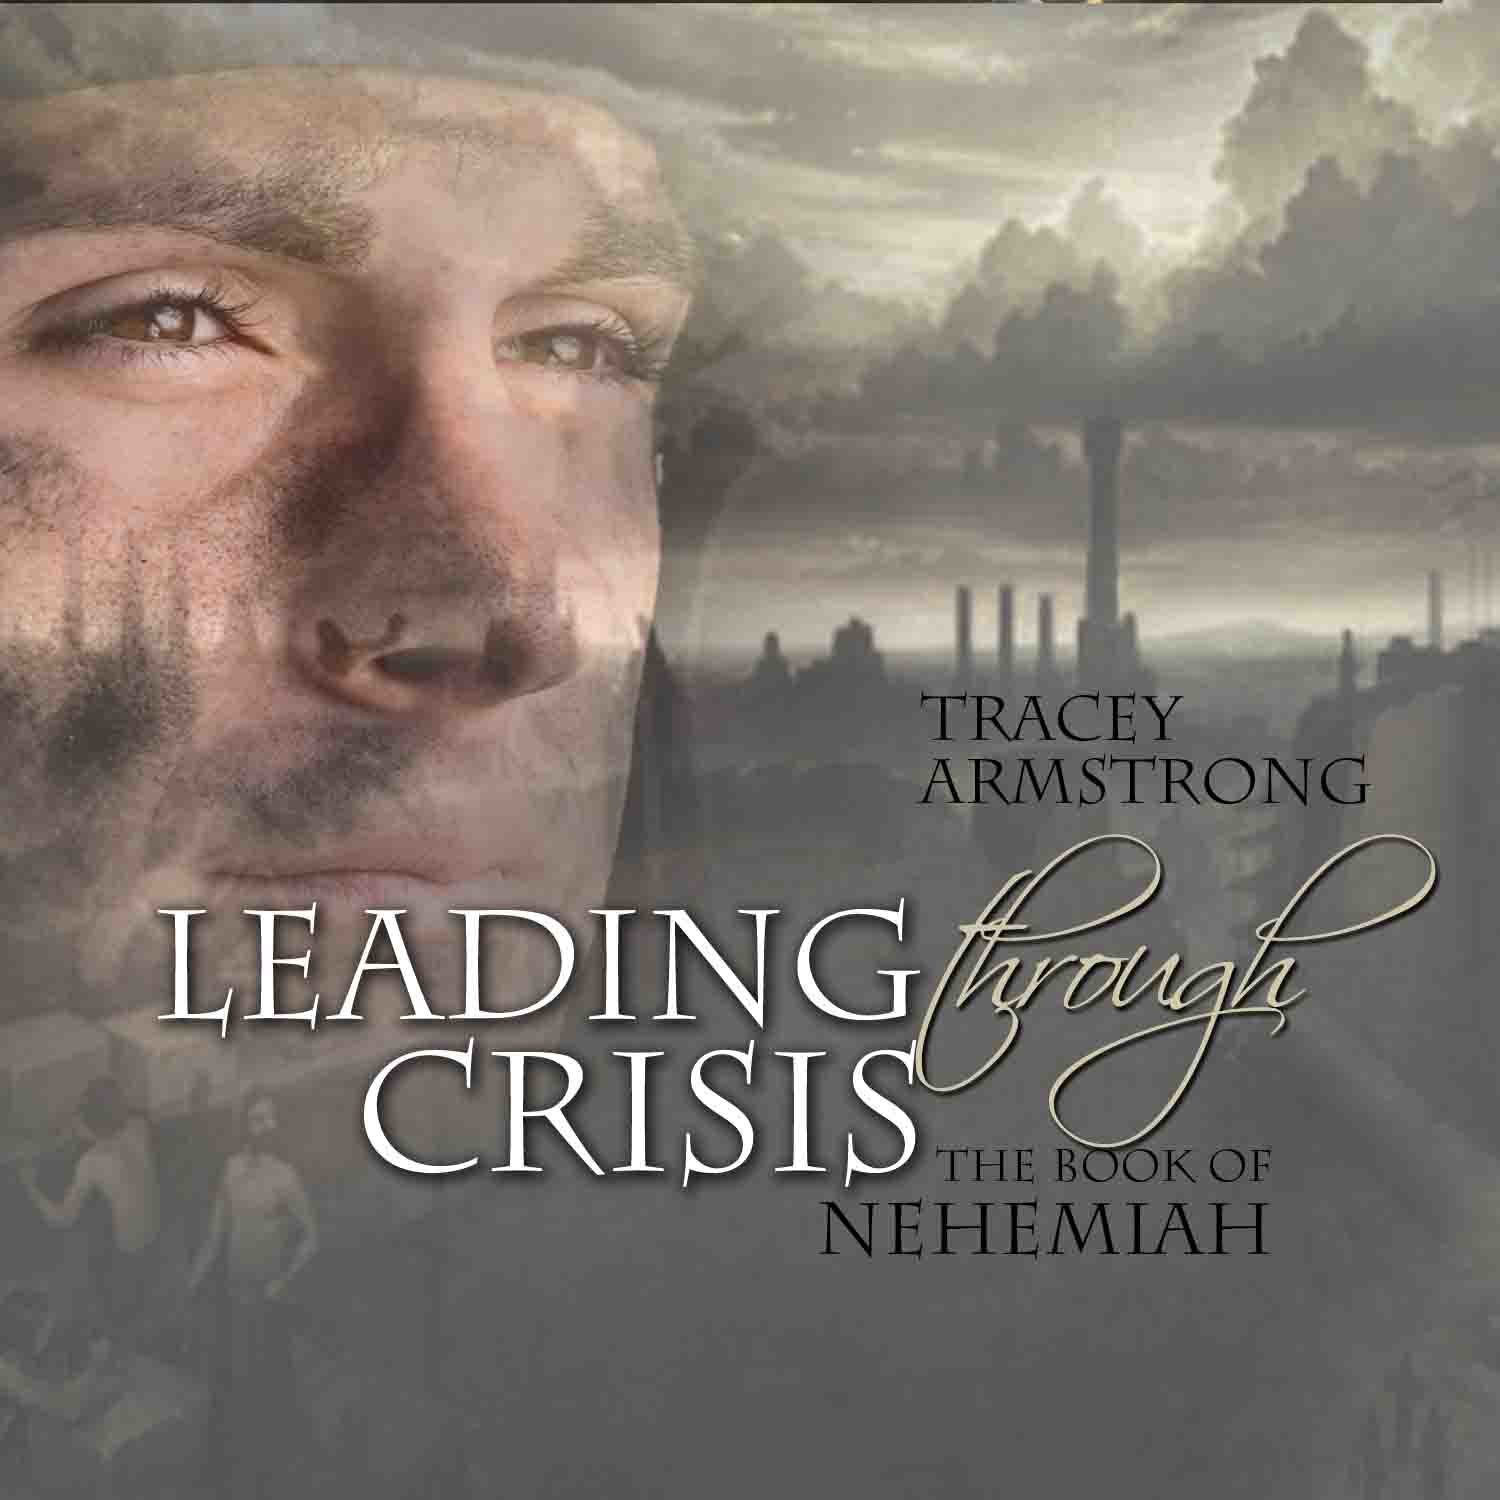 Leading Through Crisis (from the book of Nehemiah) Set 1 (Download)